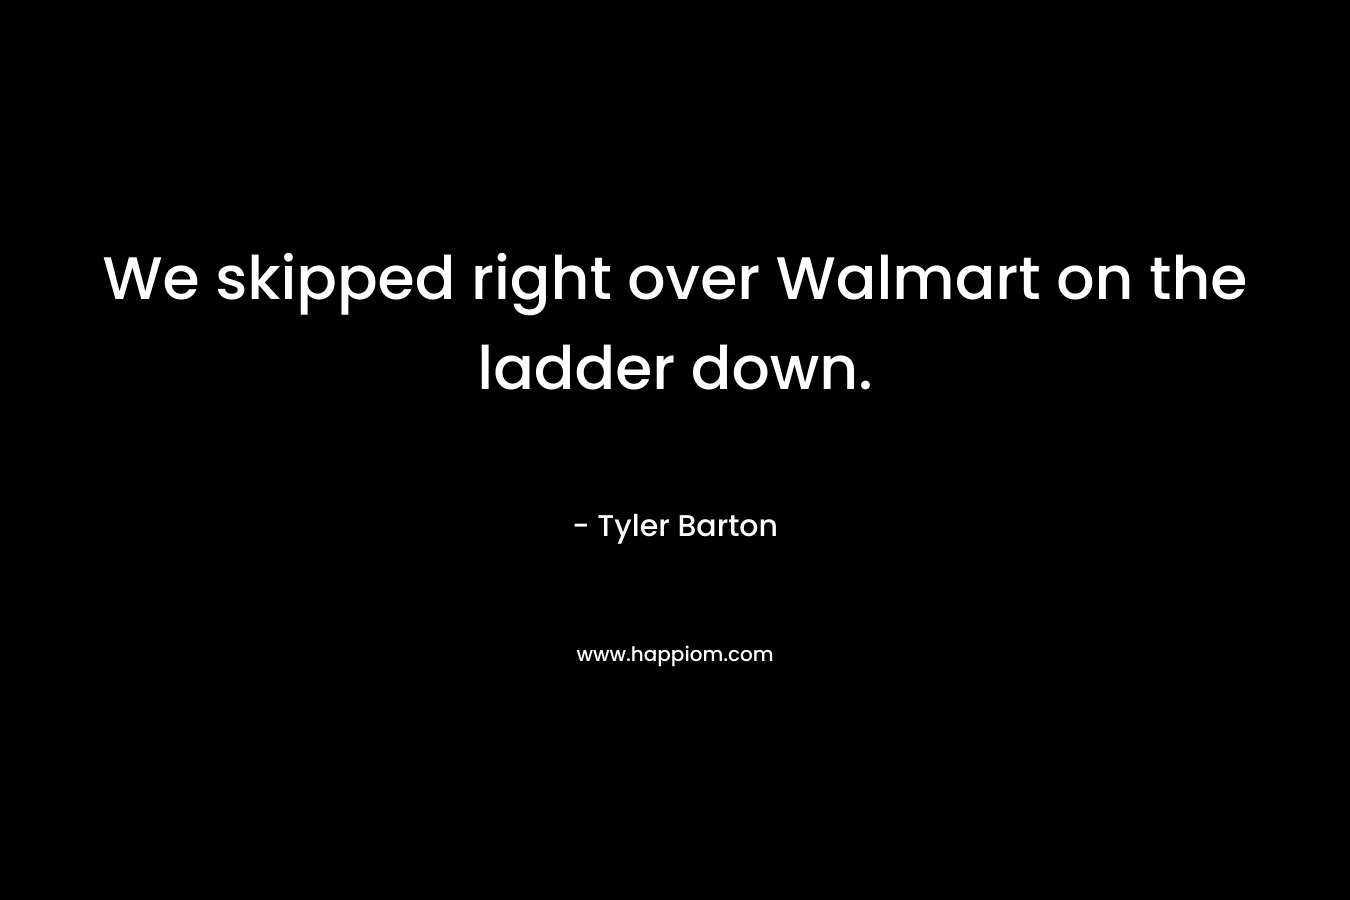 We skipped right over Walmart on the ladder down. – Tyler Barton